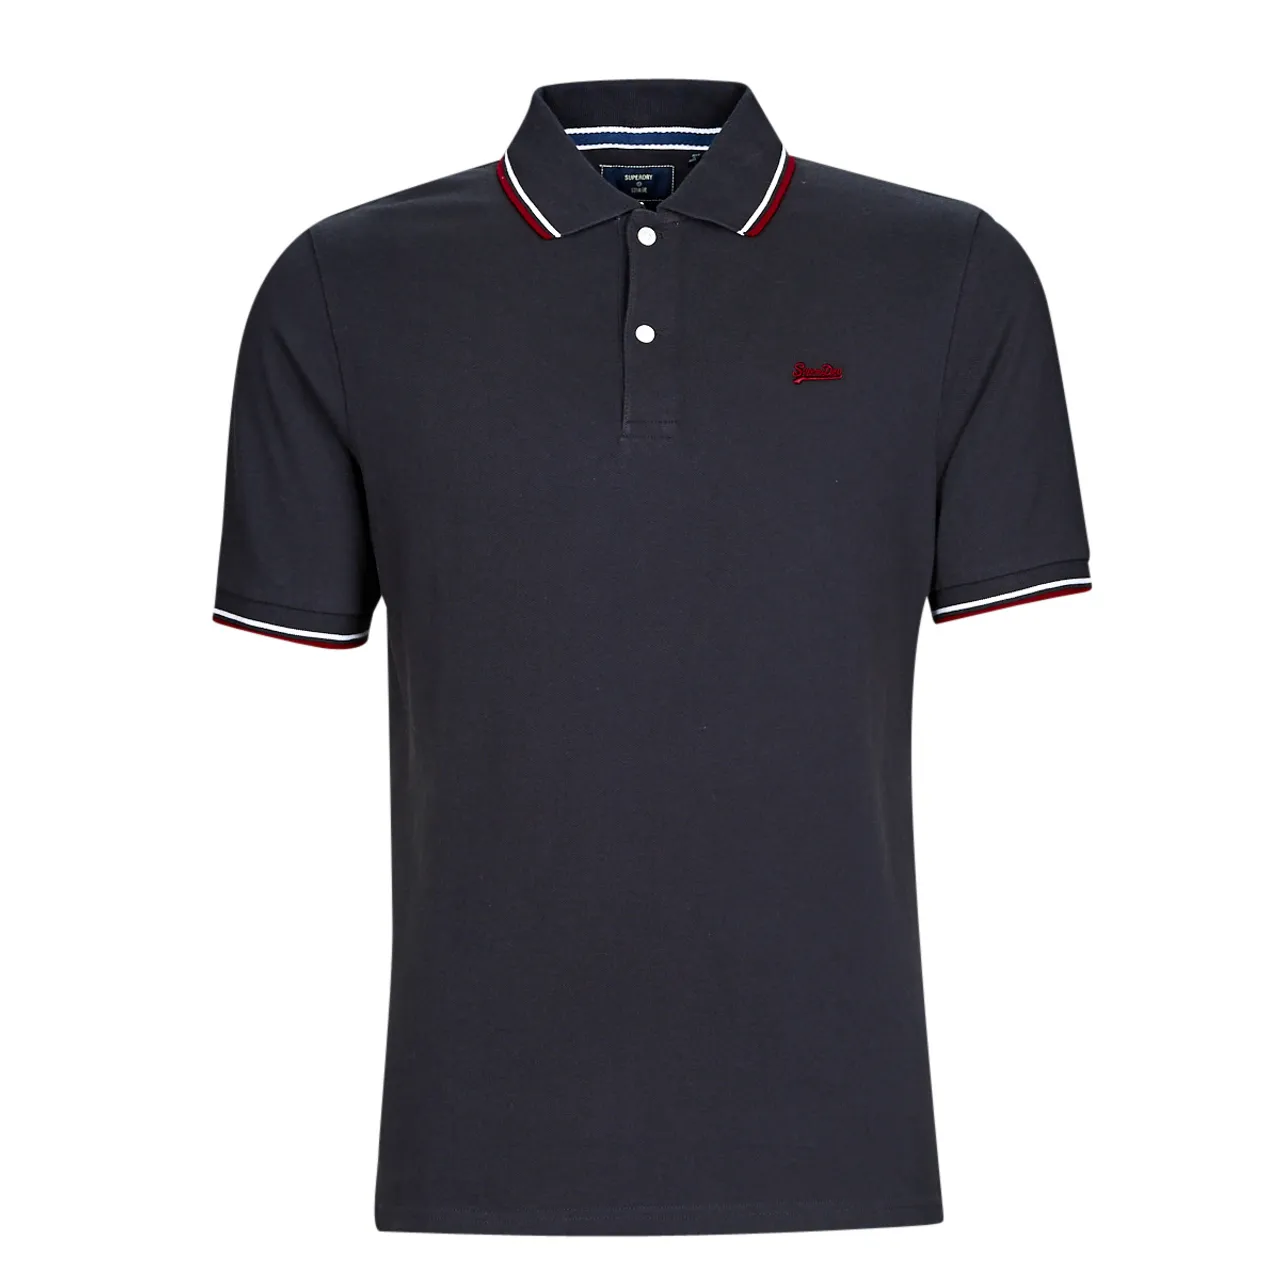 Superdry  VINTAGE TIPPED S/S POLO  men's Polo shirt in Marine